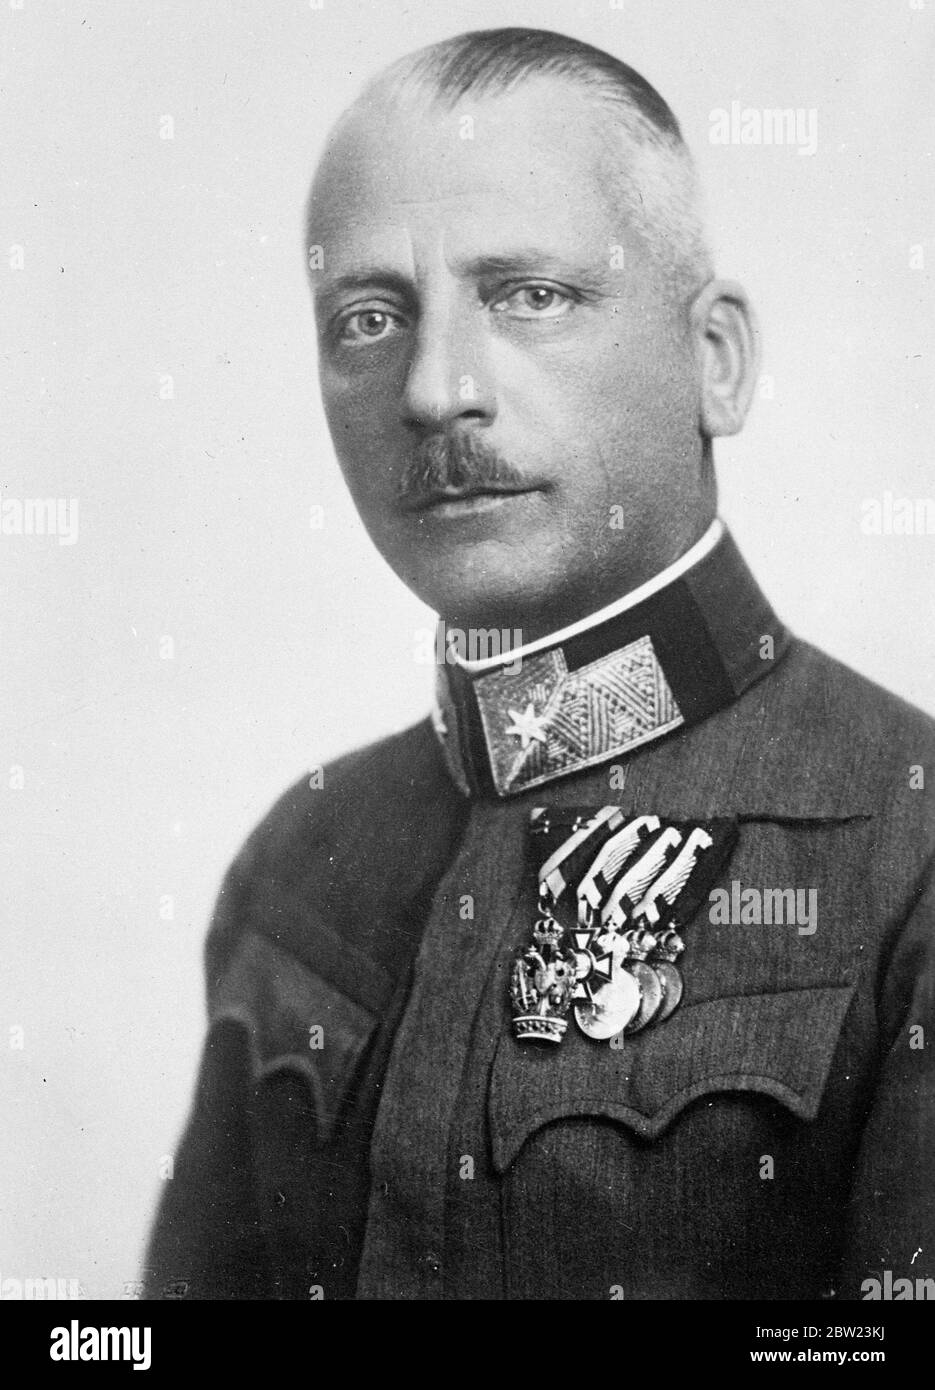 Austrian army chief 'sacked' as Nazis win. Field Marshal Jansa, Chief of the Austrian General Staff, has resigned and will be replaced by another army leader who is more favourable to Germany as a result of the surrender of Chancellor Schuschnigg Austria to the demands of Herr Hitler. Austria is now considered to have submitted to Nazi domination. 16 February 1938 Stock Photo